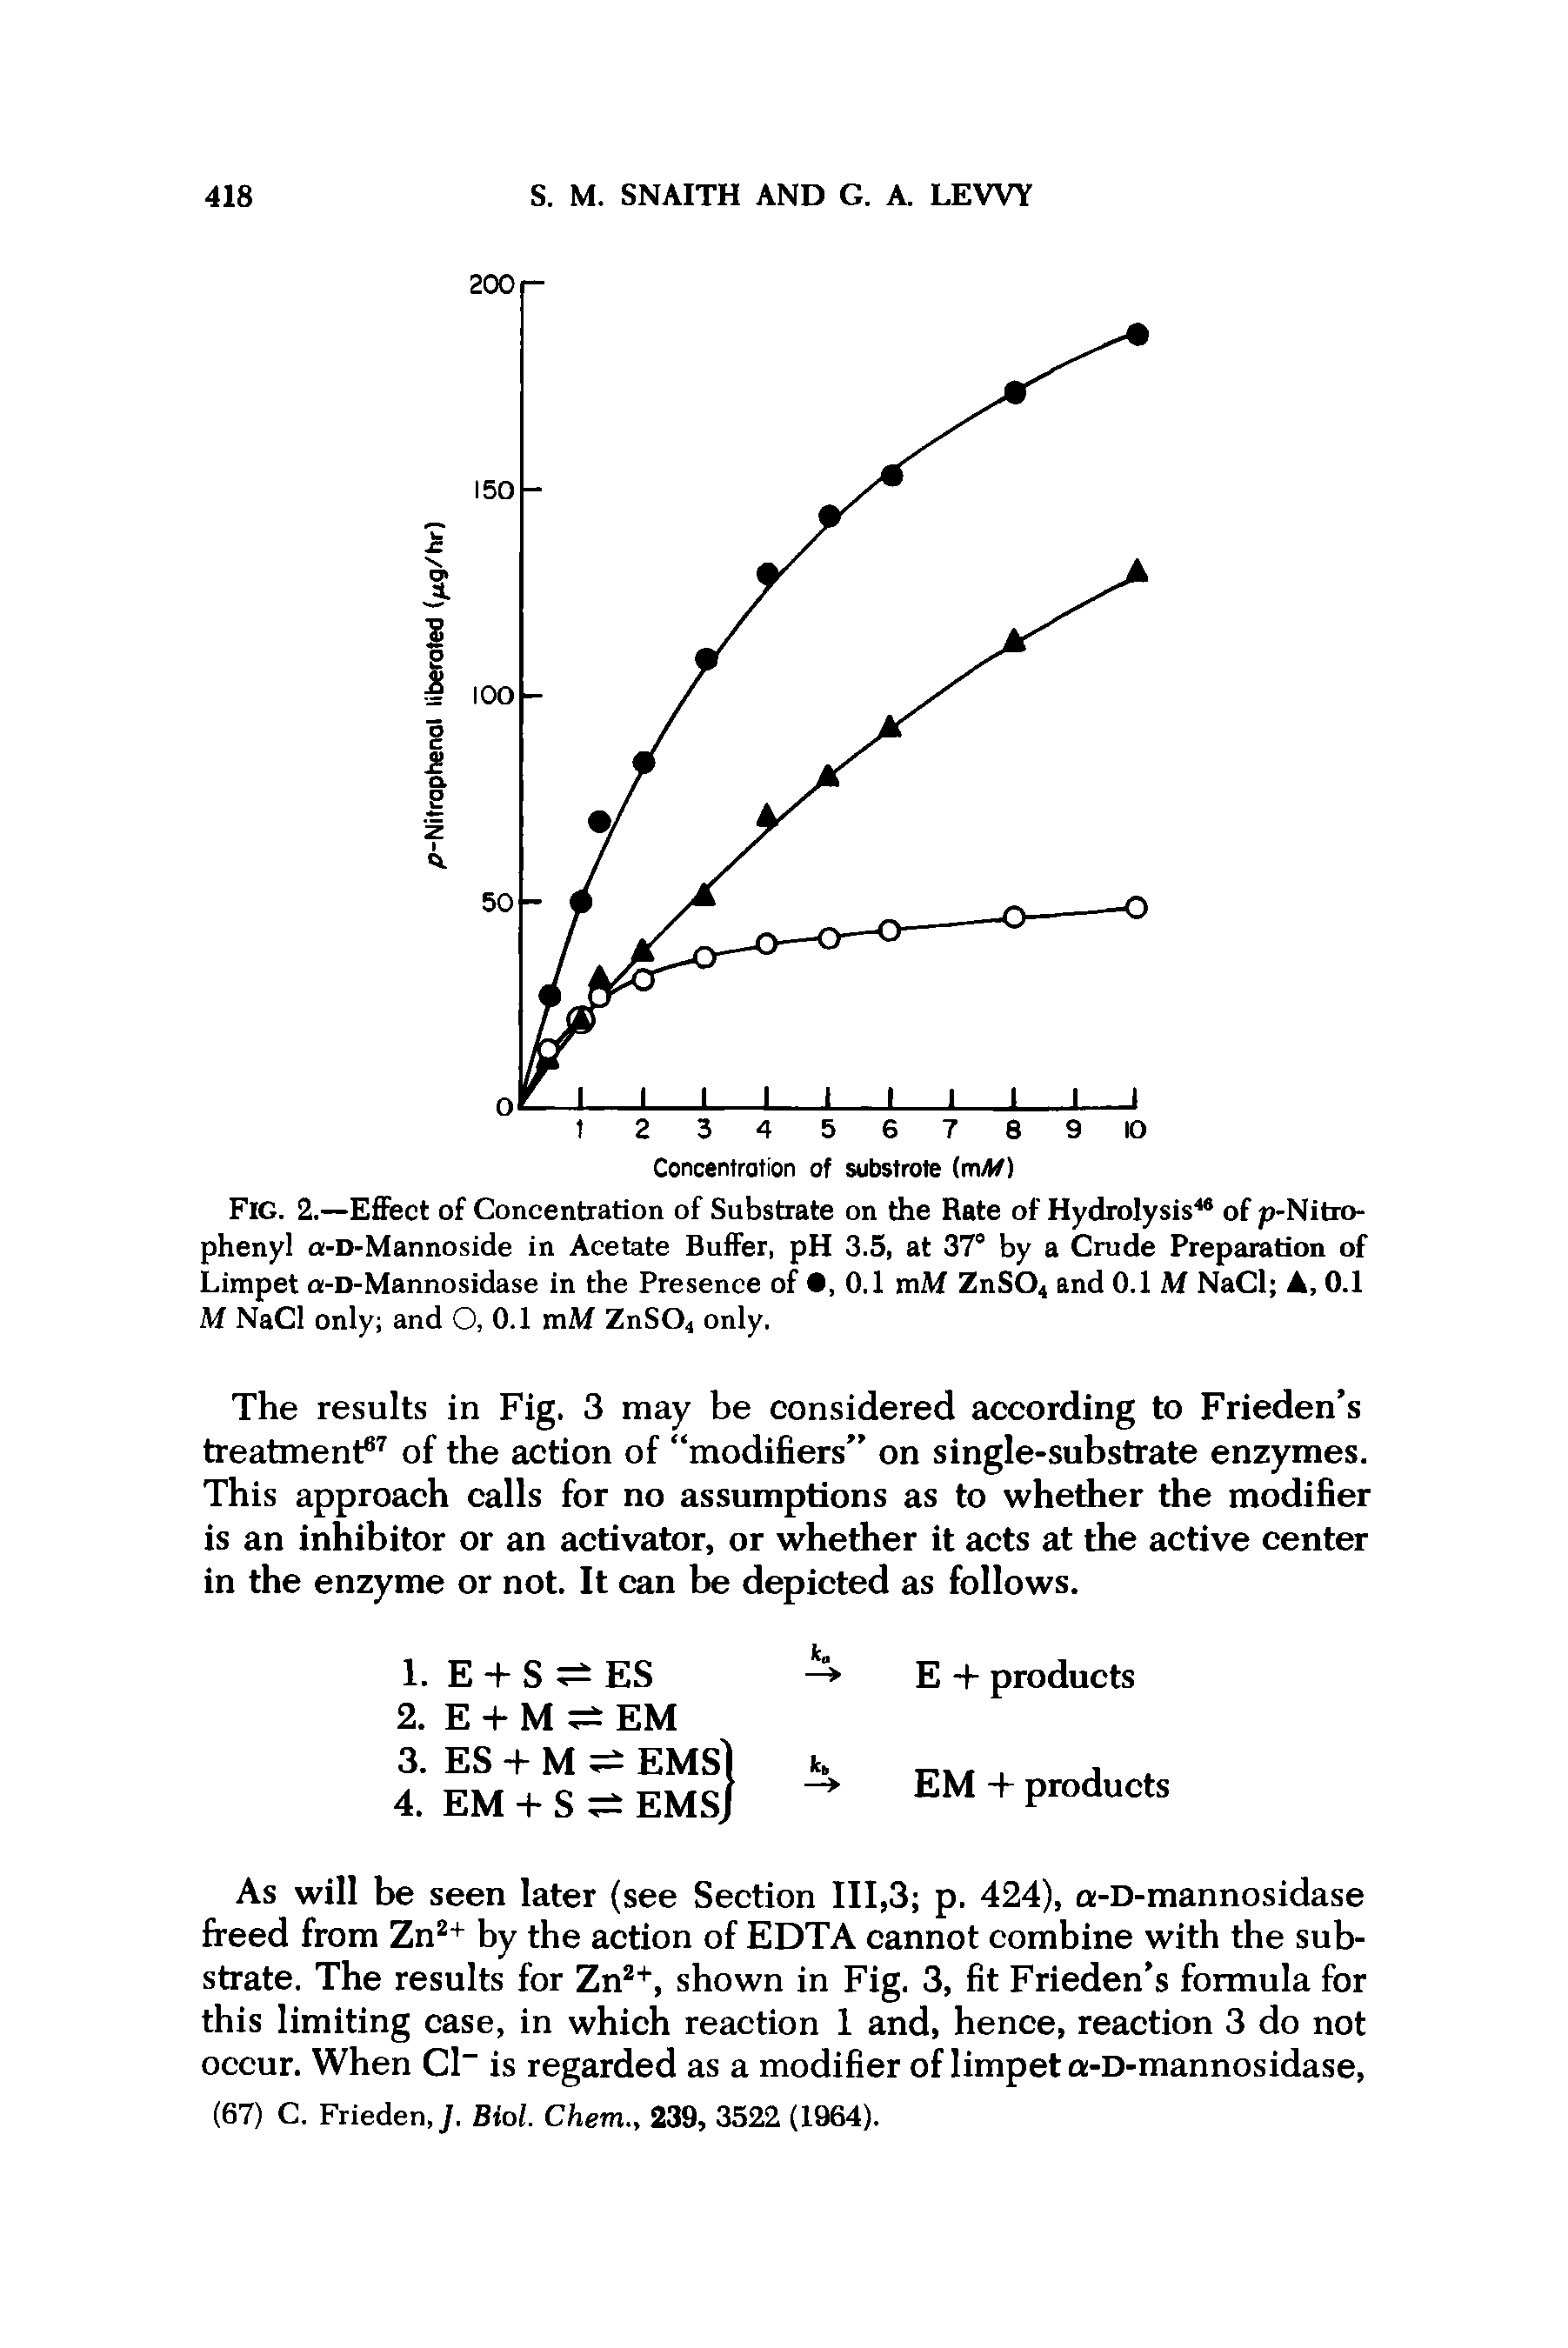 Fig. 2.—Effect of Concentration of Substrate on the Rate of Hydrolysis4 of p-Nitro-phenyl a-D-Mannoside in Acetate Buffer, pH 3.5, at 37° by a Crude Preparation of Limpet a-D-Mannosidase in the Presence of , 0.1 mM ZnS04 and 0.1 M NaCl A, 0.1 M NaCl only and O, 0.1 mM ZnS04 only.